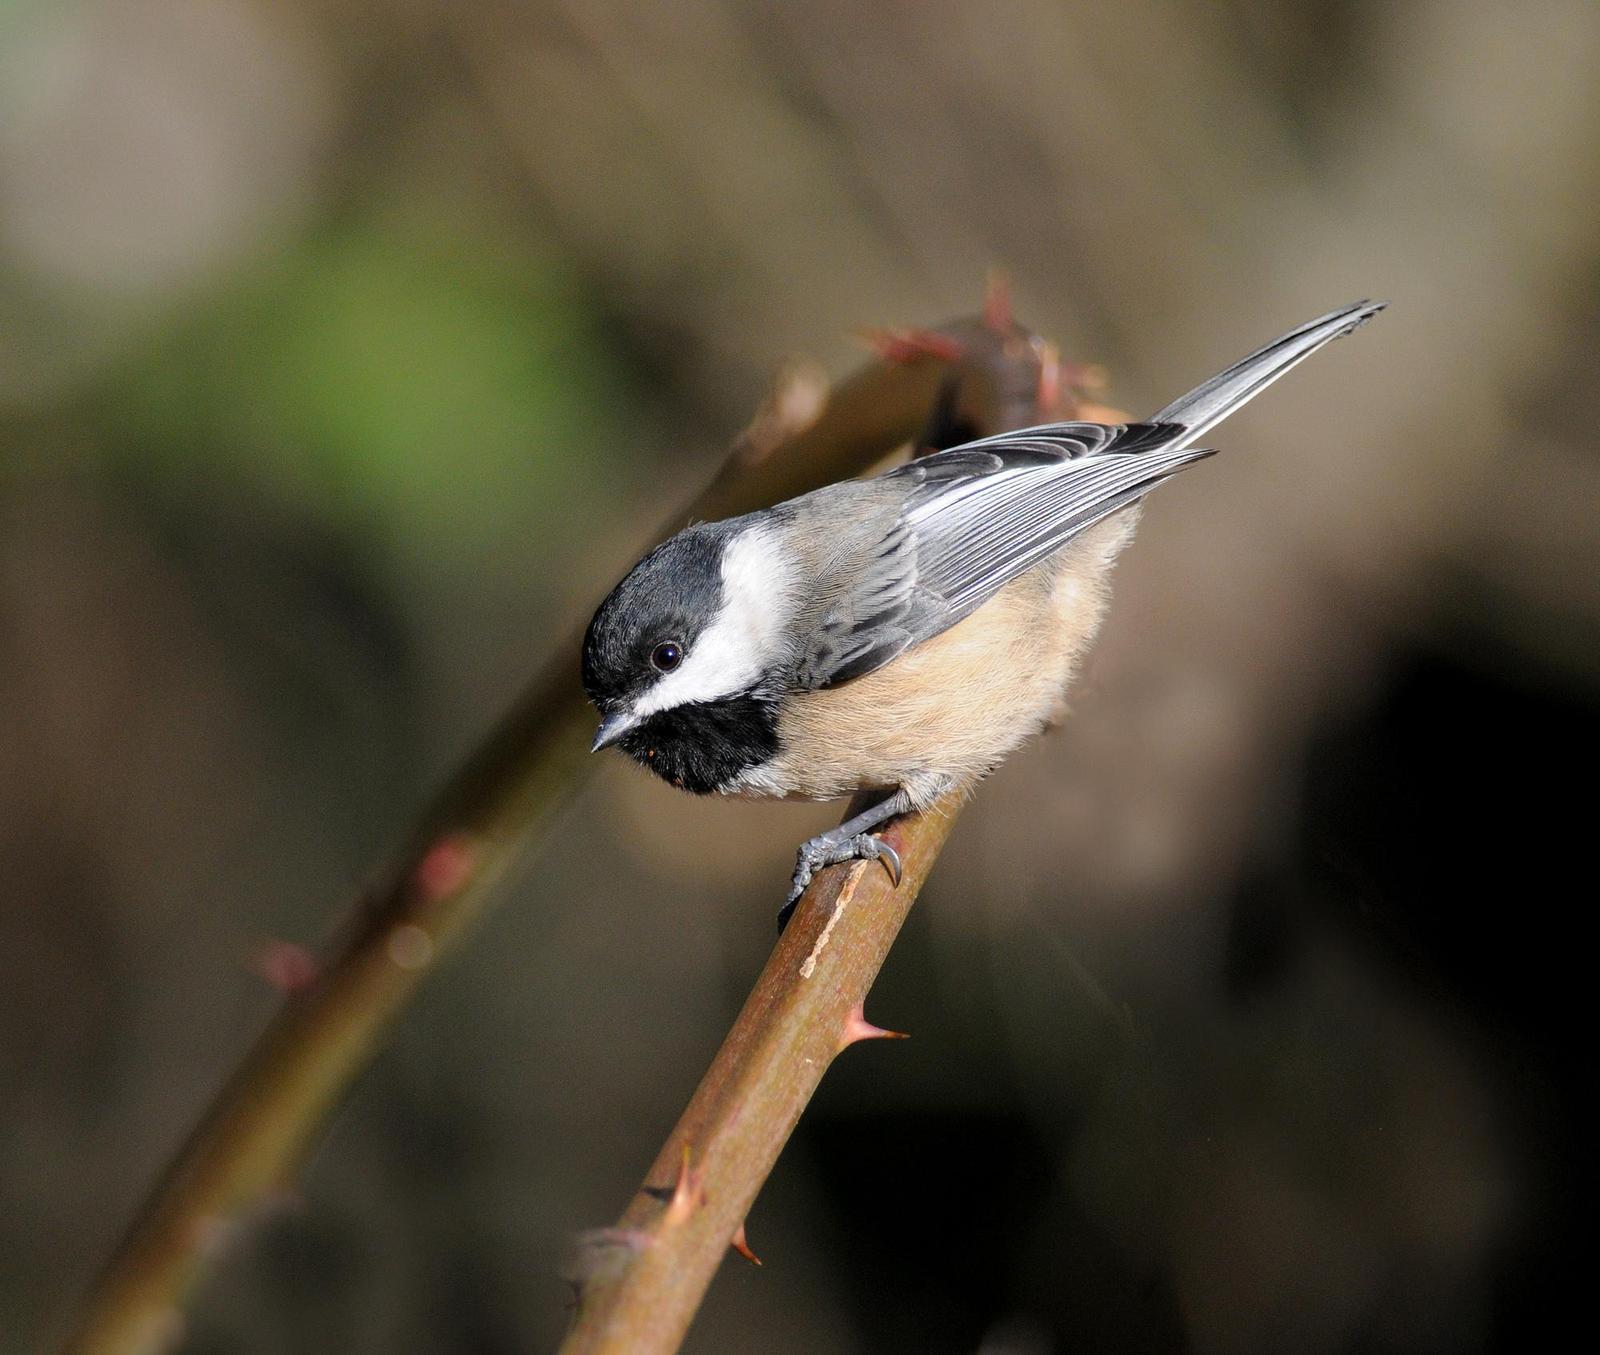 Black-capped Chickadee Photo by Steven Mlodinow